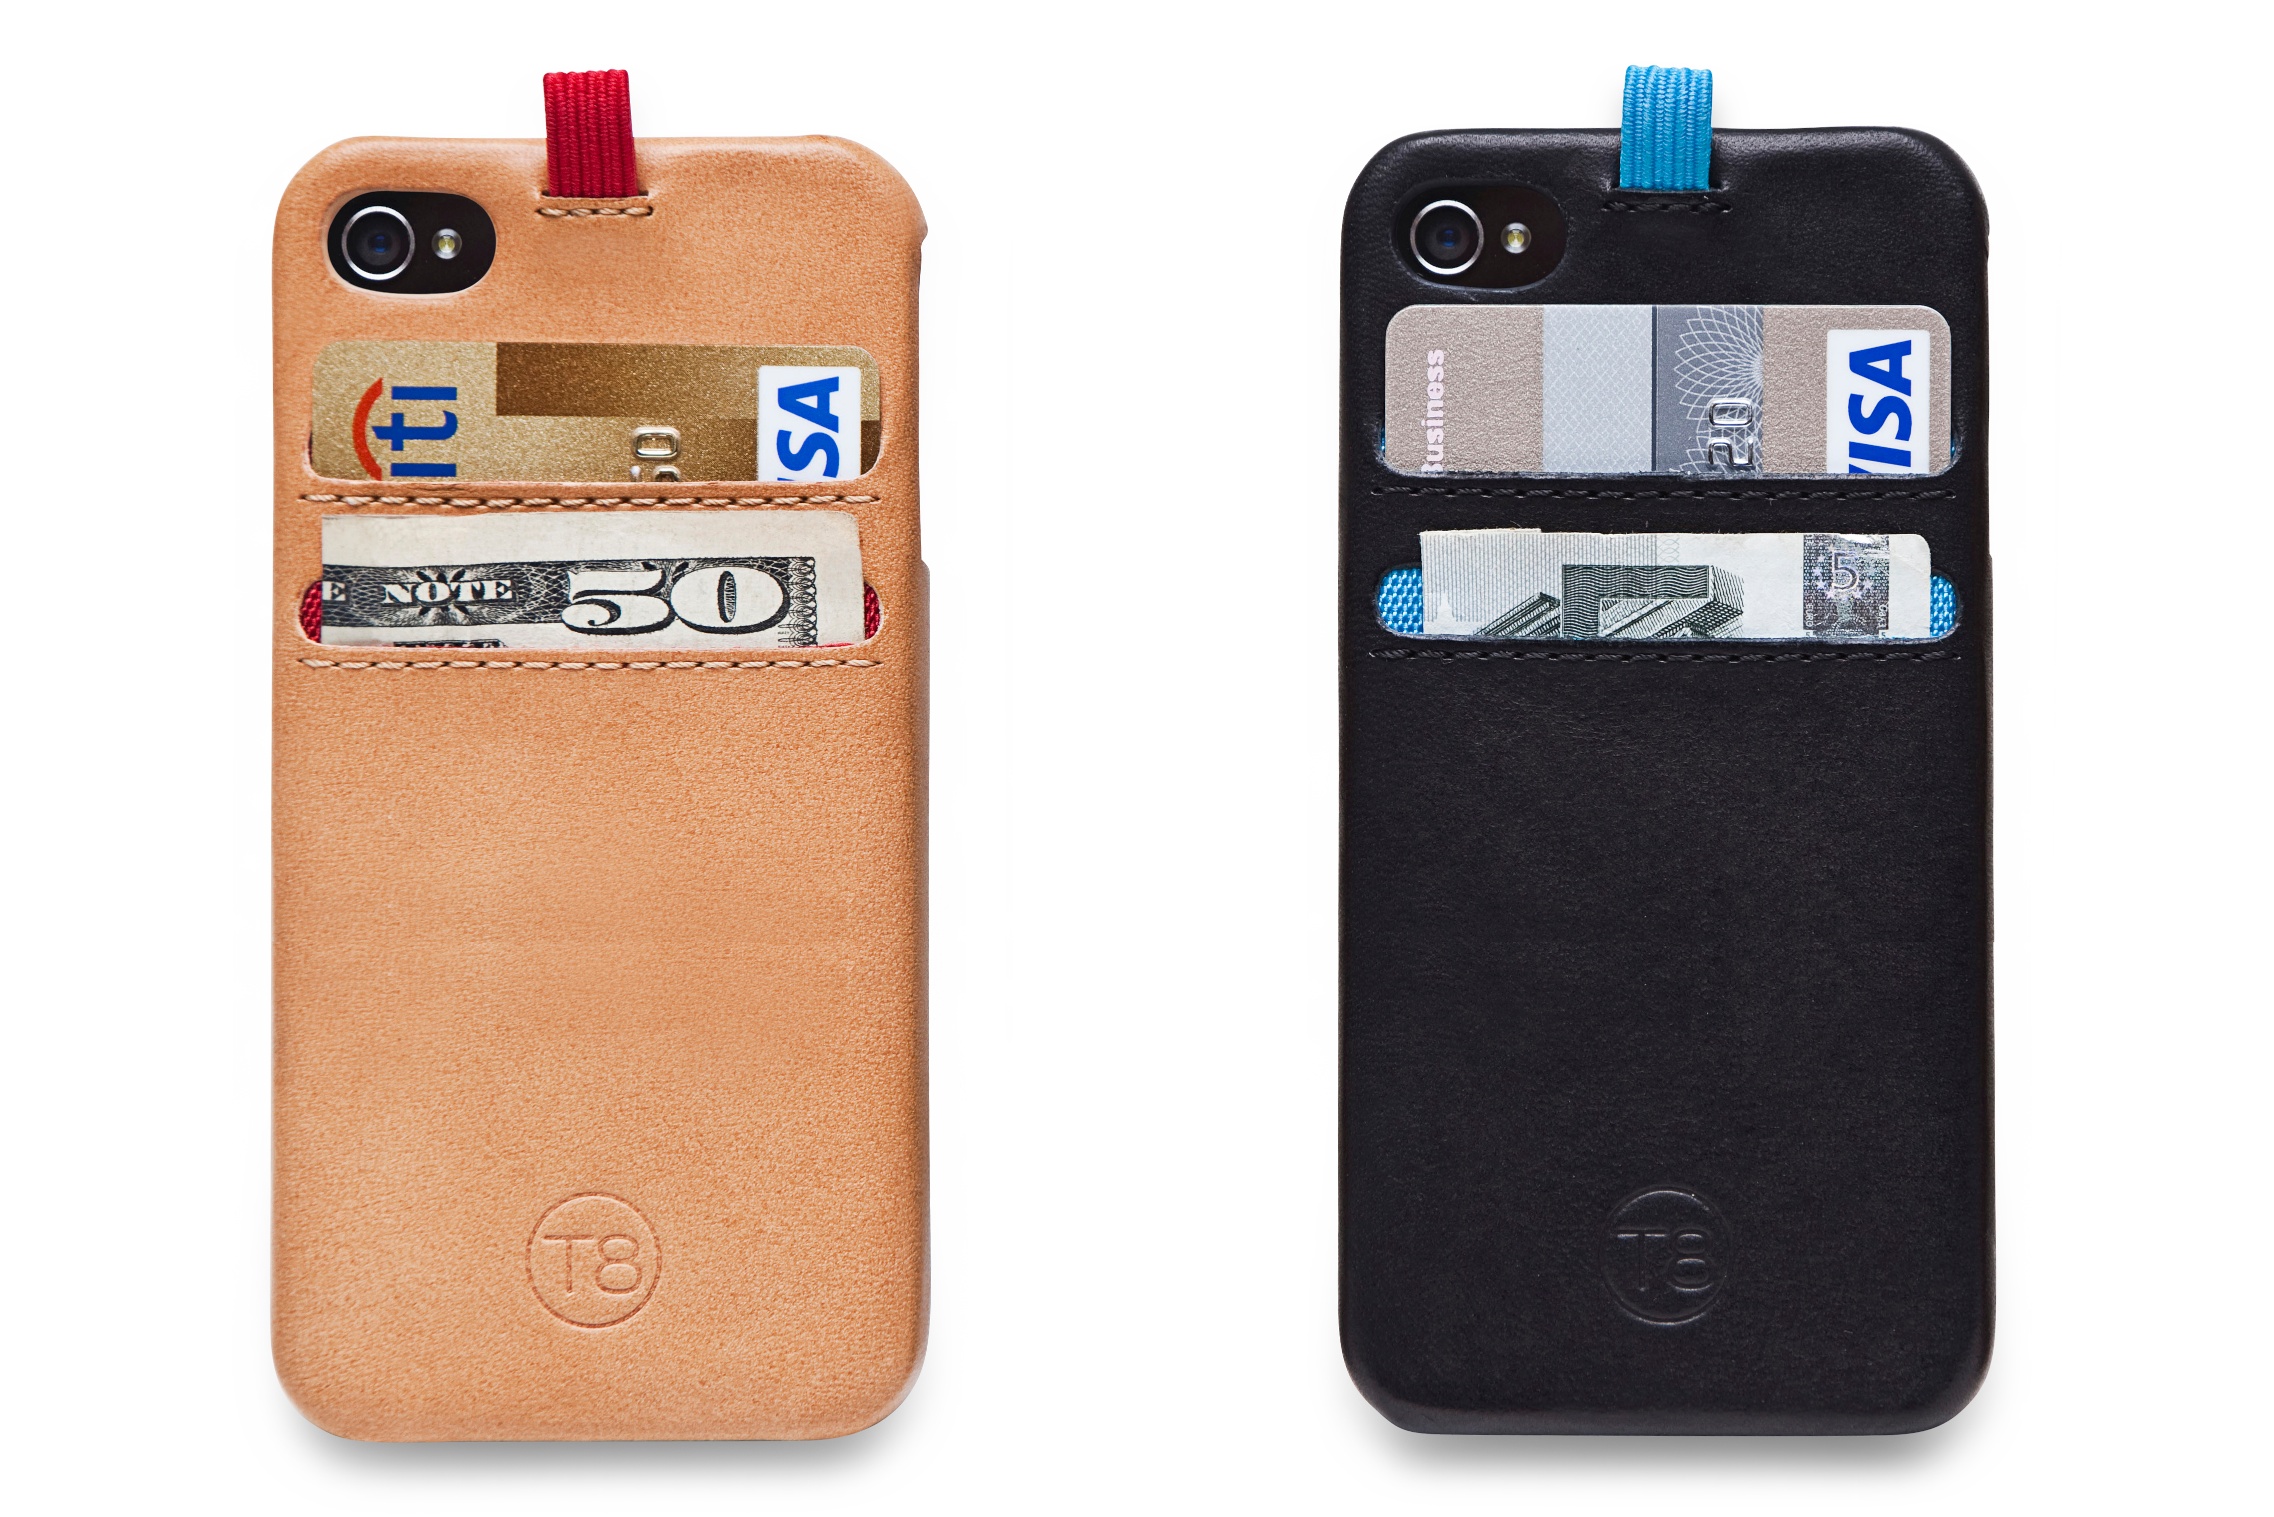 T8 Releases Slim and Light STORM iPhone 5 Wallet Case